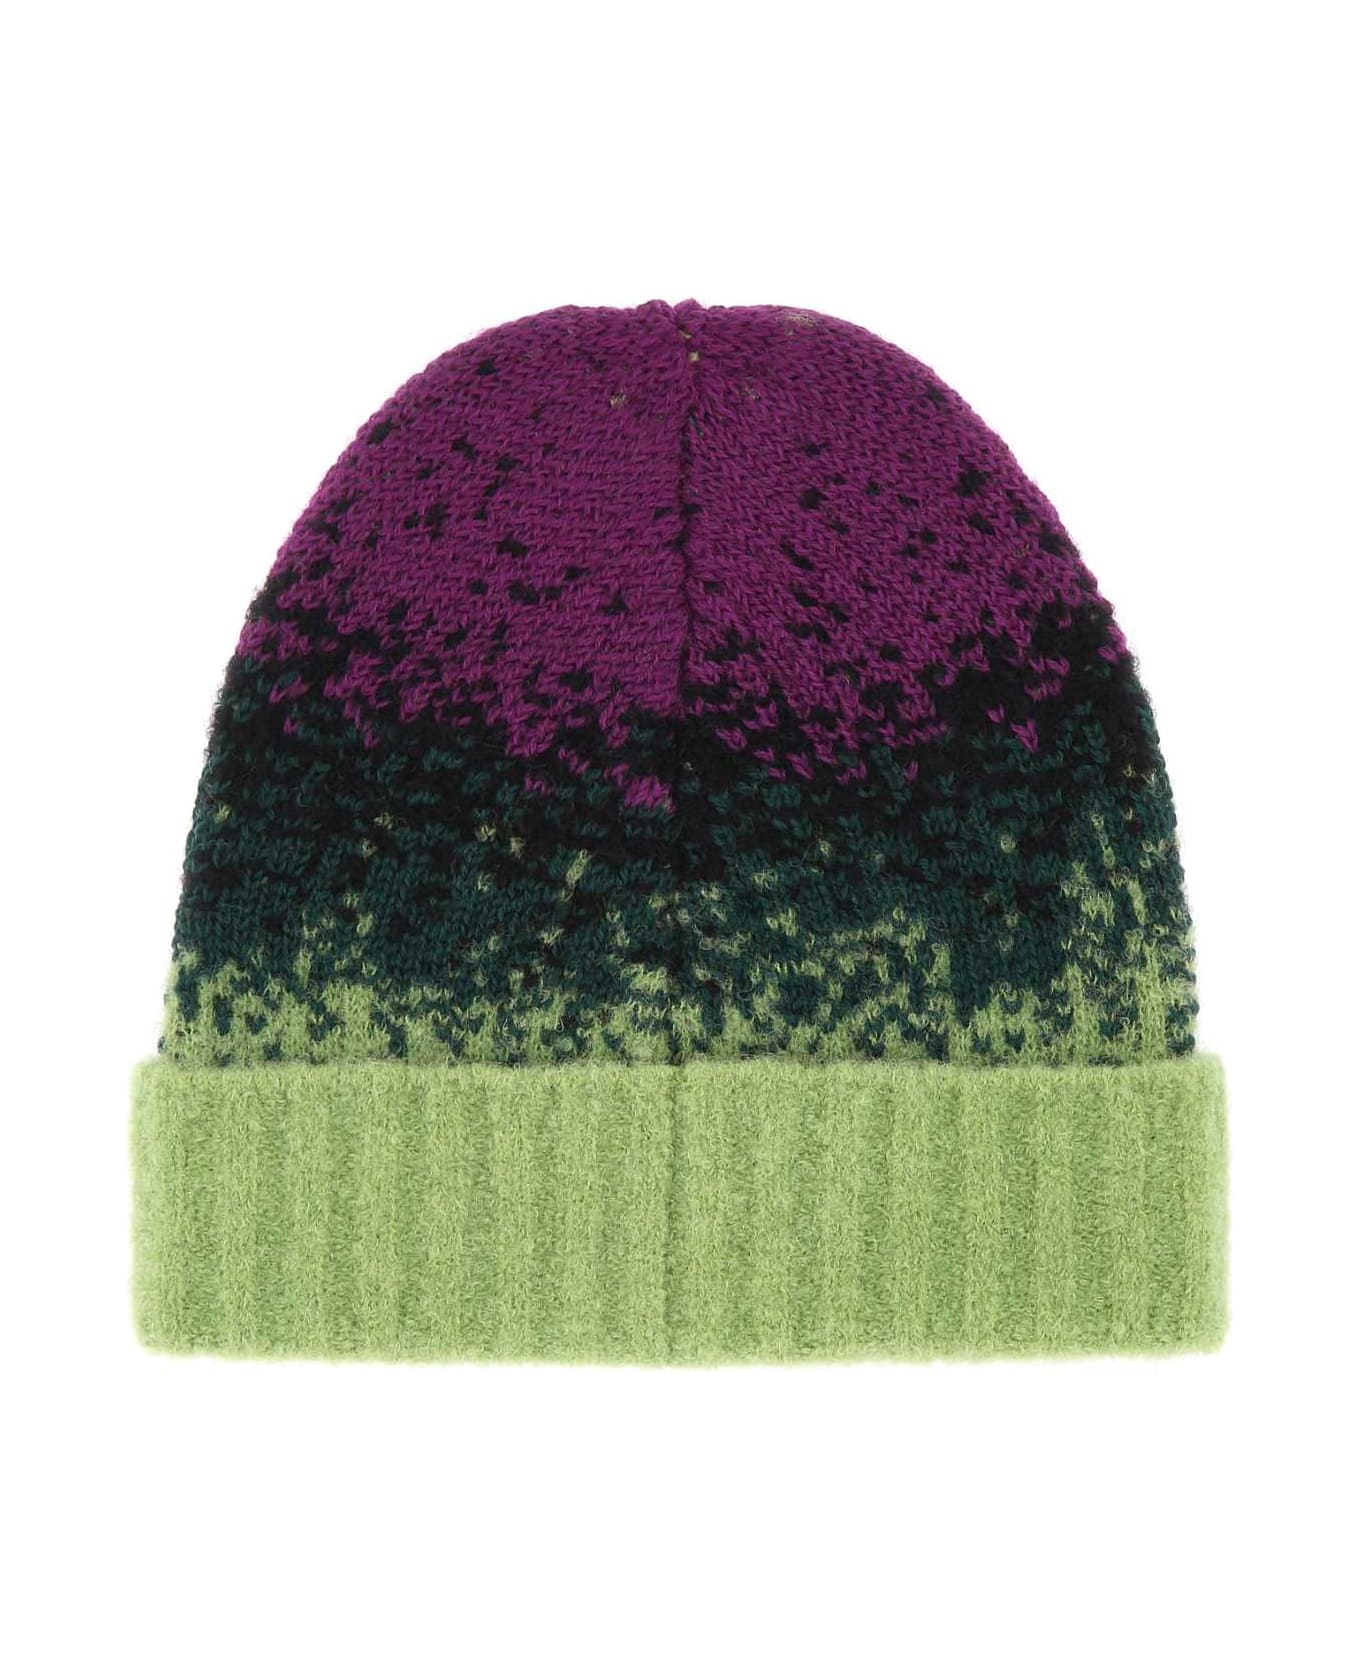 Y/Project Multicolor Stretch Wool Blend Beanie Hat - GREYELGRE